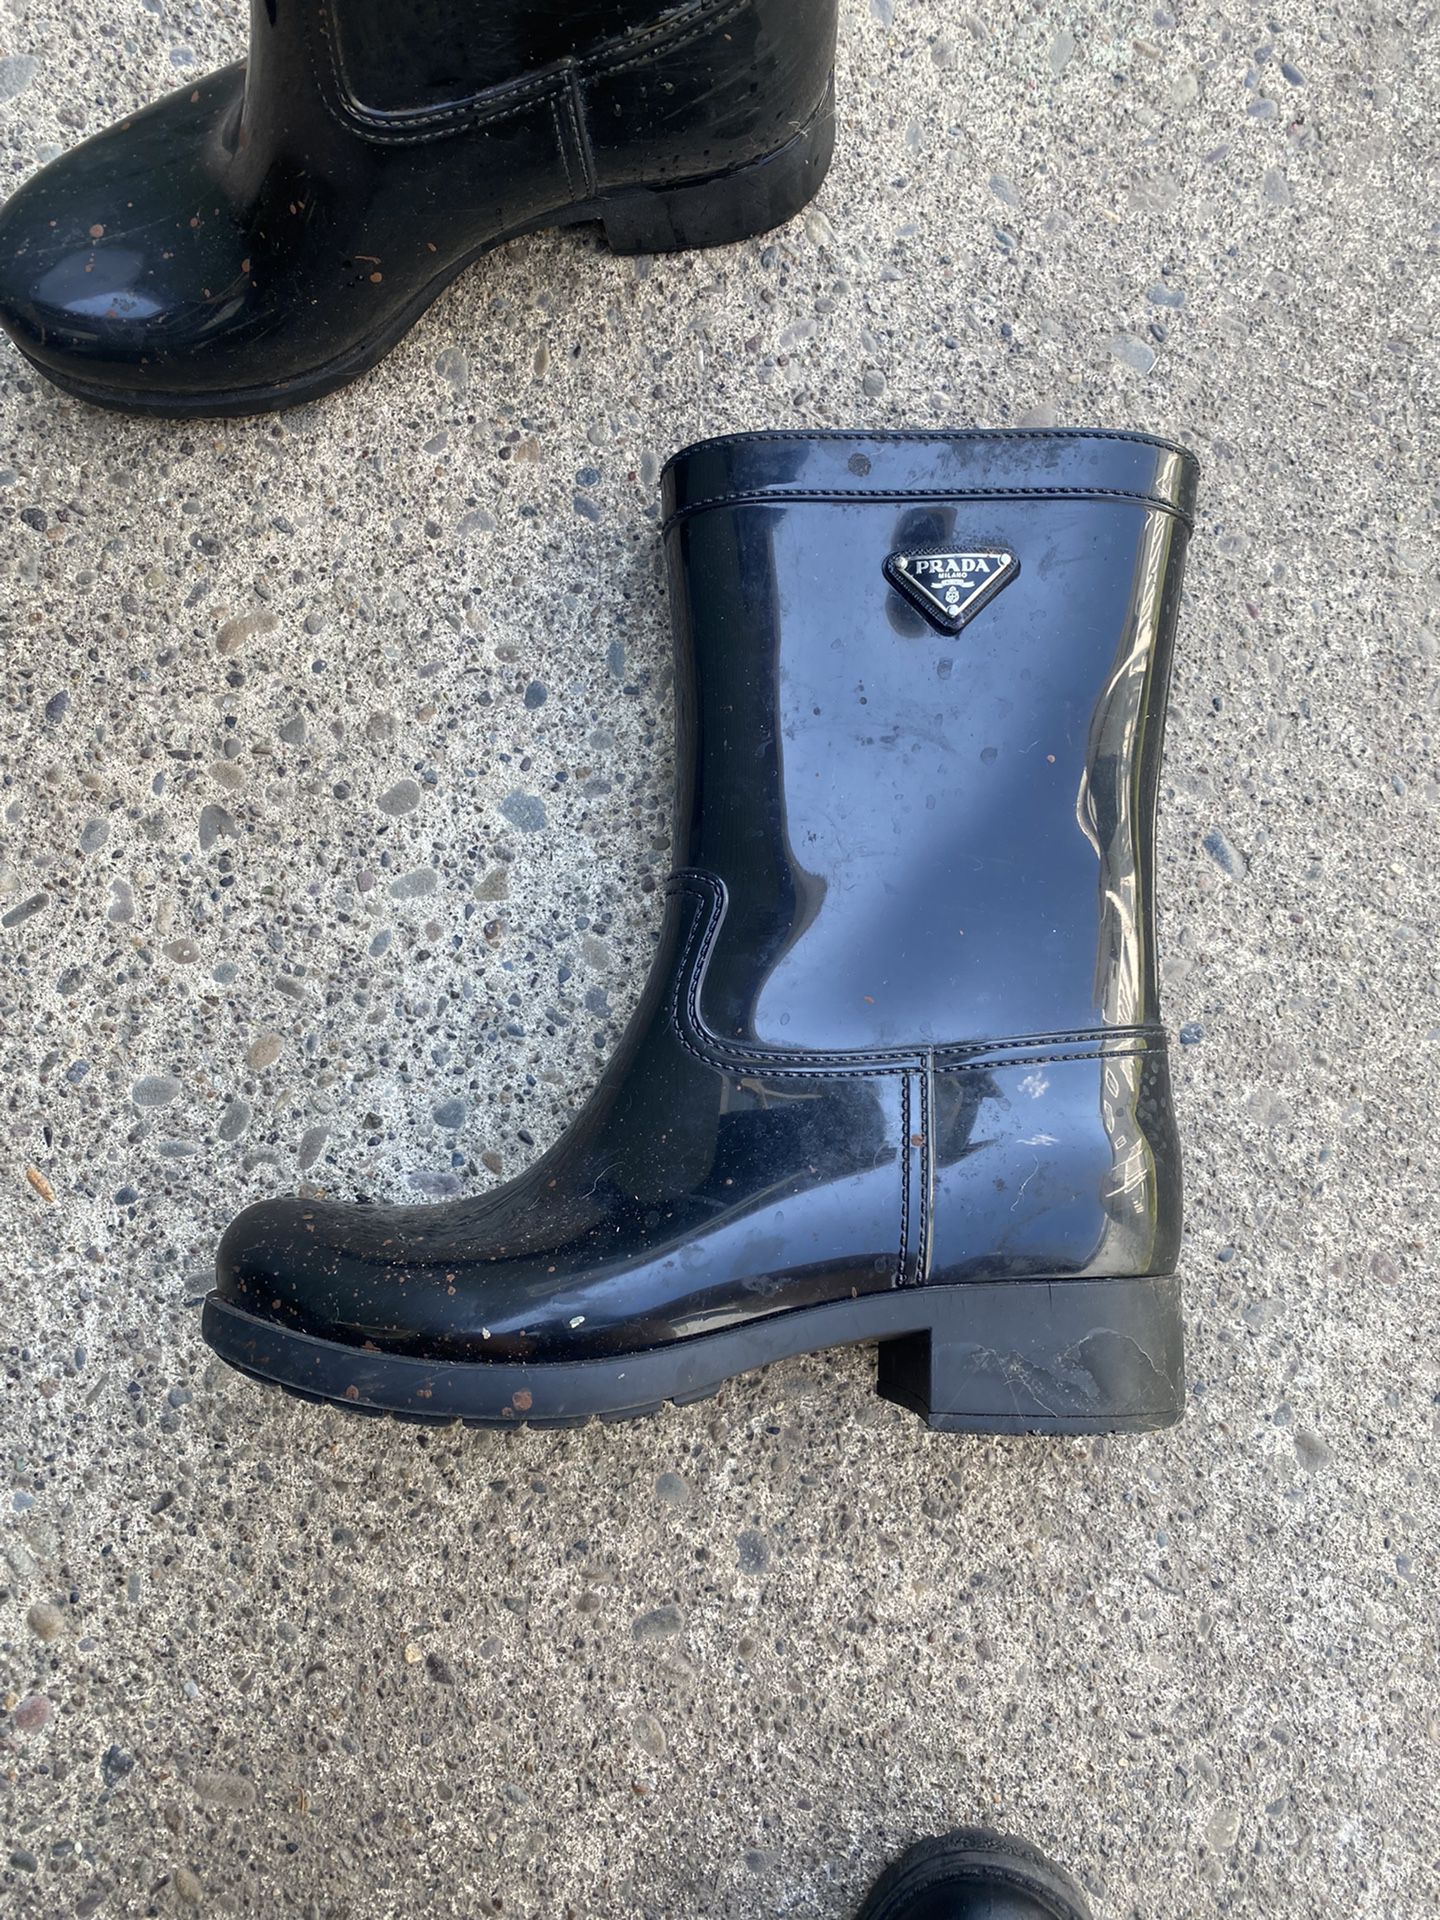 Prada Rain Boots for Sale in Salem, OR - OfferUp